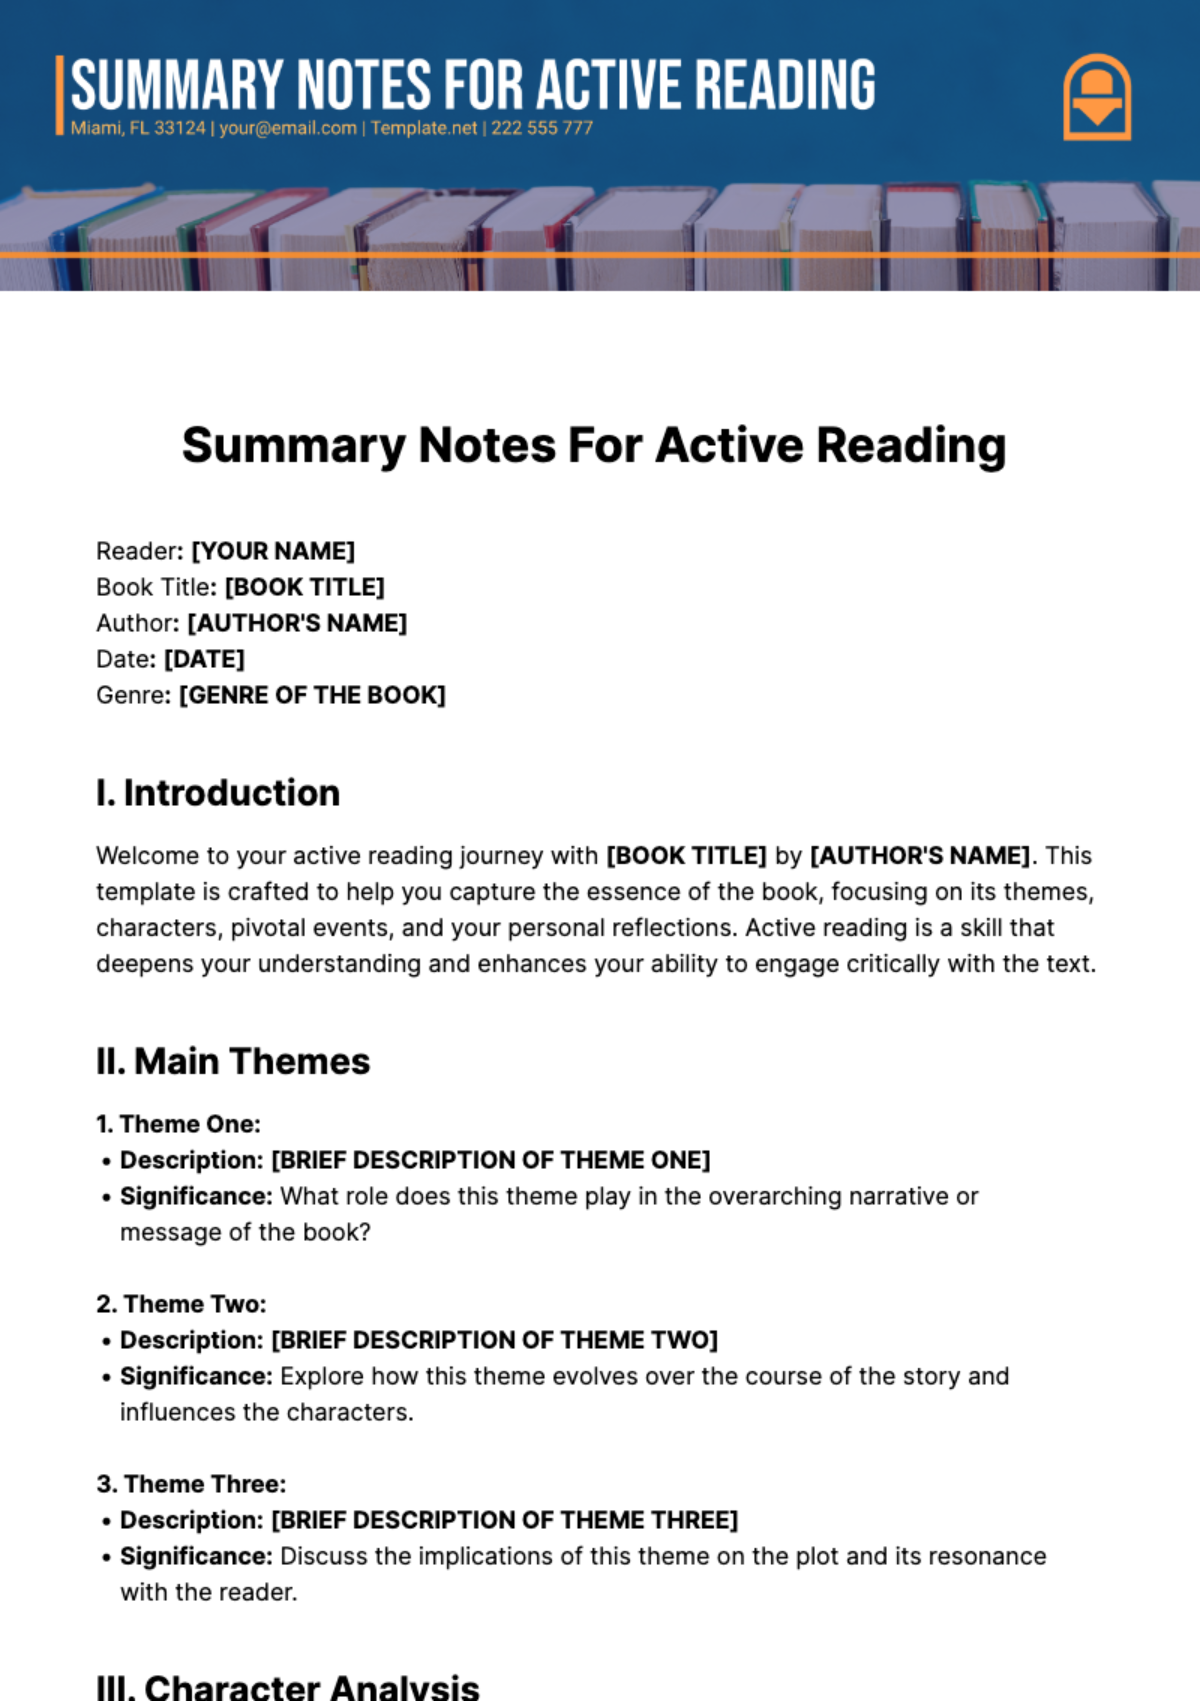 Summary Notes For Active Reading Template